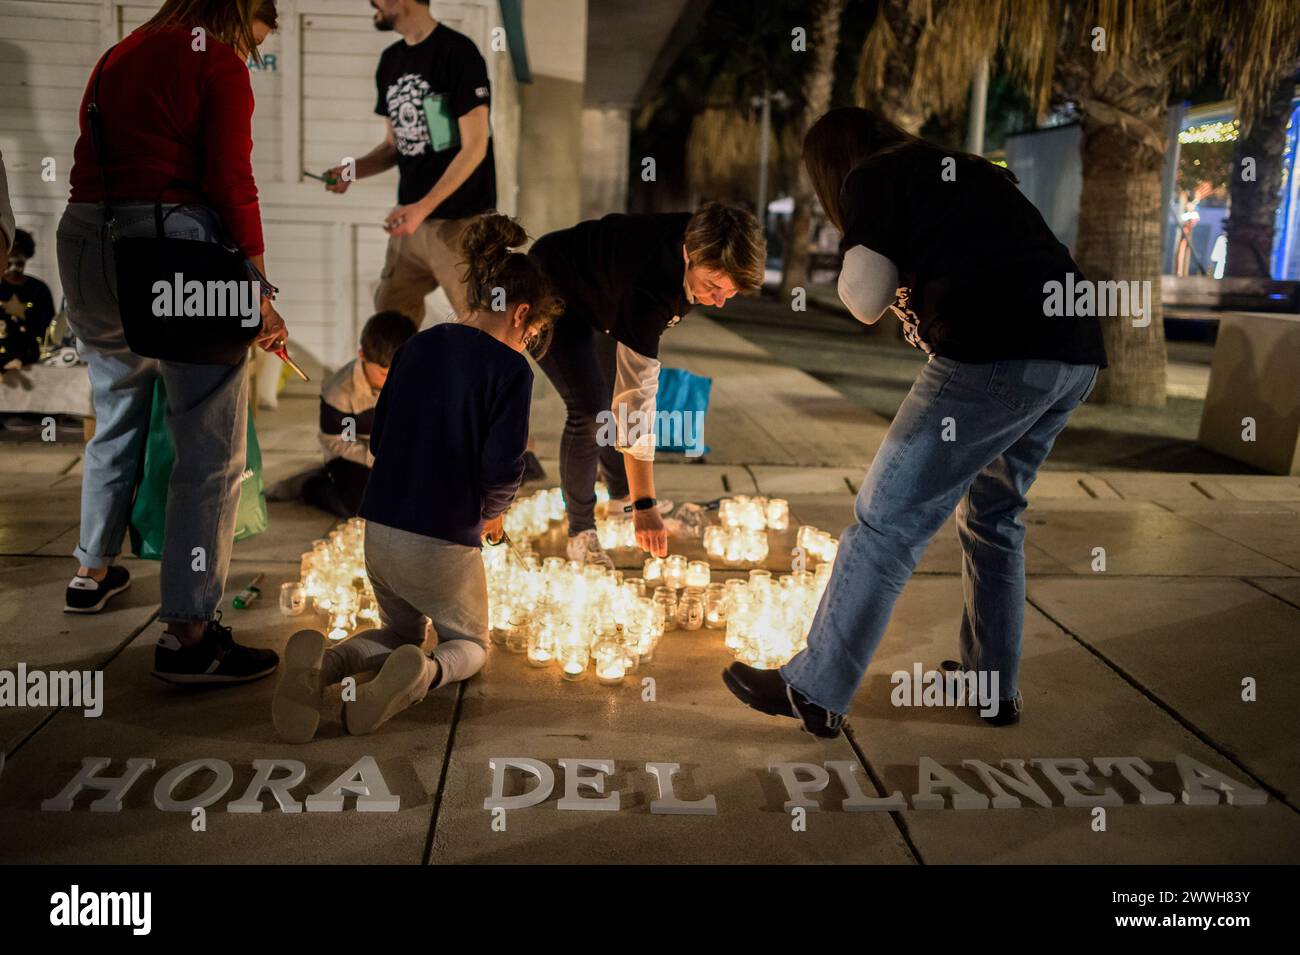 Members of the World Wildlife Foundation (WWF) are seen lighting candles of a mosaic that depicts a panda, the symbol of WWF, during the Earth Hour in the centre of Malaga. The figure made with candles is a panda, the symbol of the WWF. Thousands of cities around the world switched off their electric lights during the Earth Hour to highlight the dangers of climate change. The figure made with candles is a panda, the symbol of the WWF. Thousands of cities worldwide switched off their electric lights during Earth Hour to highlight the dangers of climate change. Stock Photo